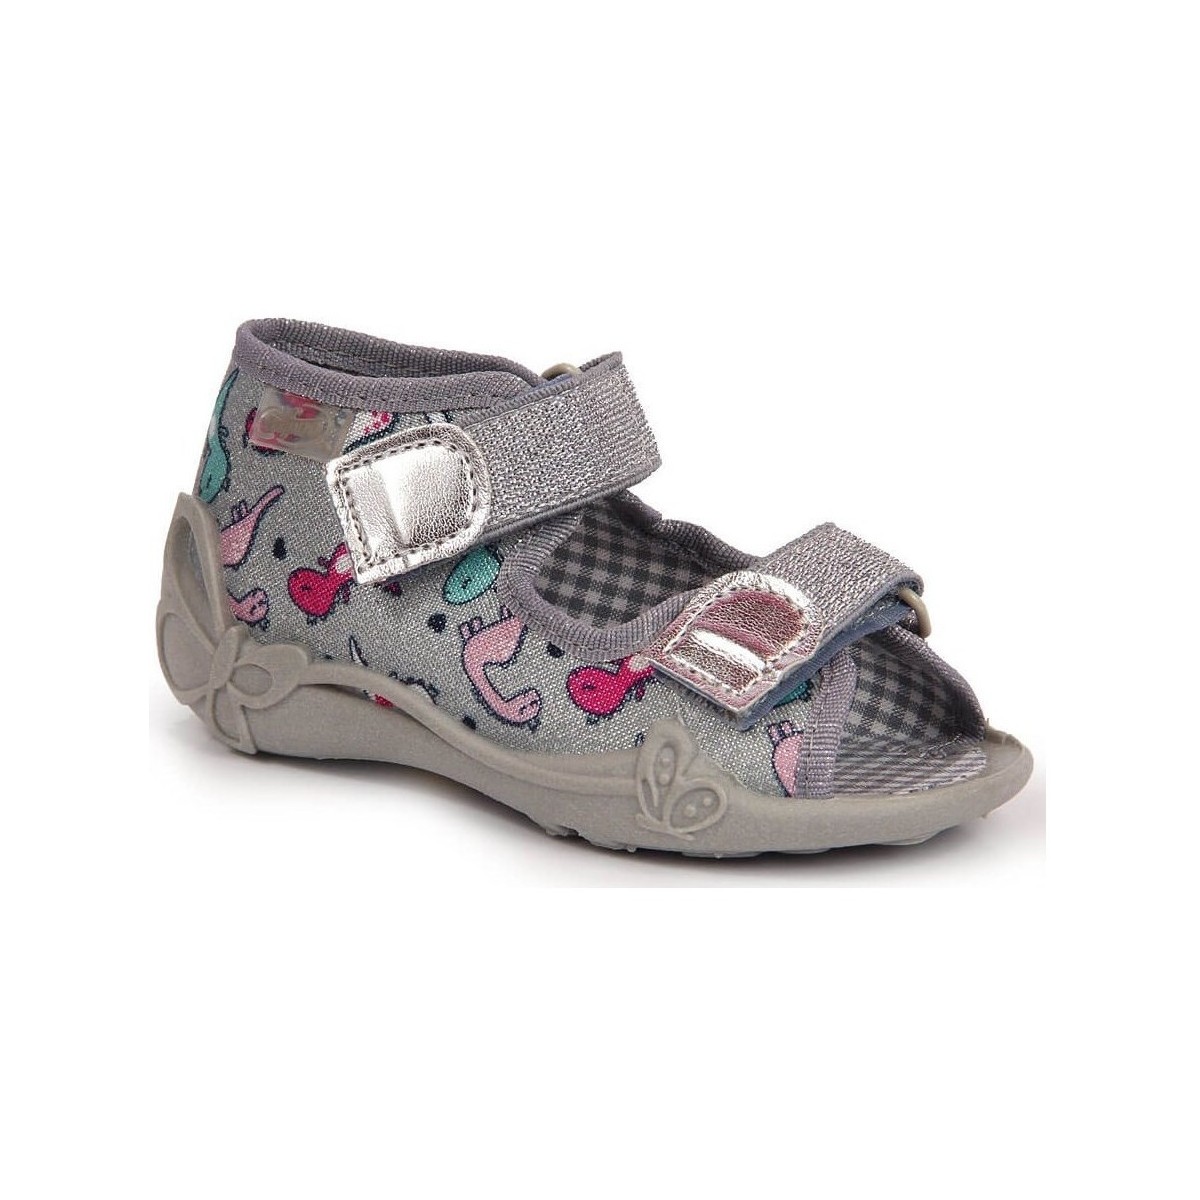 Chaussures Enfant Chaussons Befado BEF9 Gris